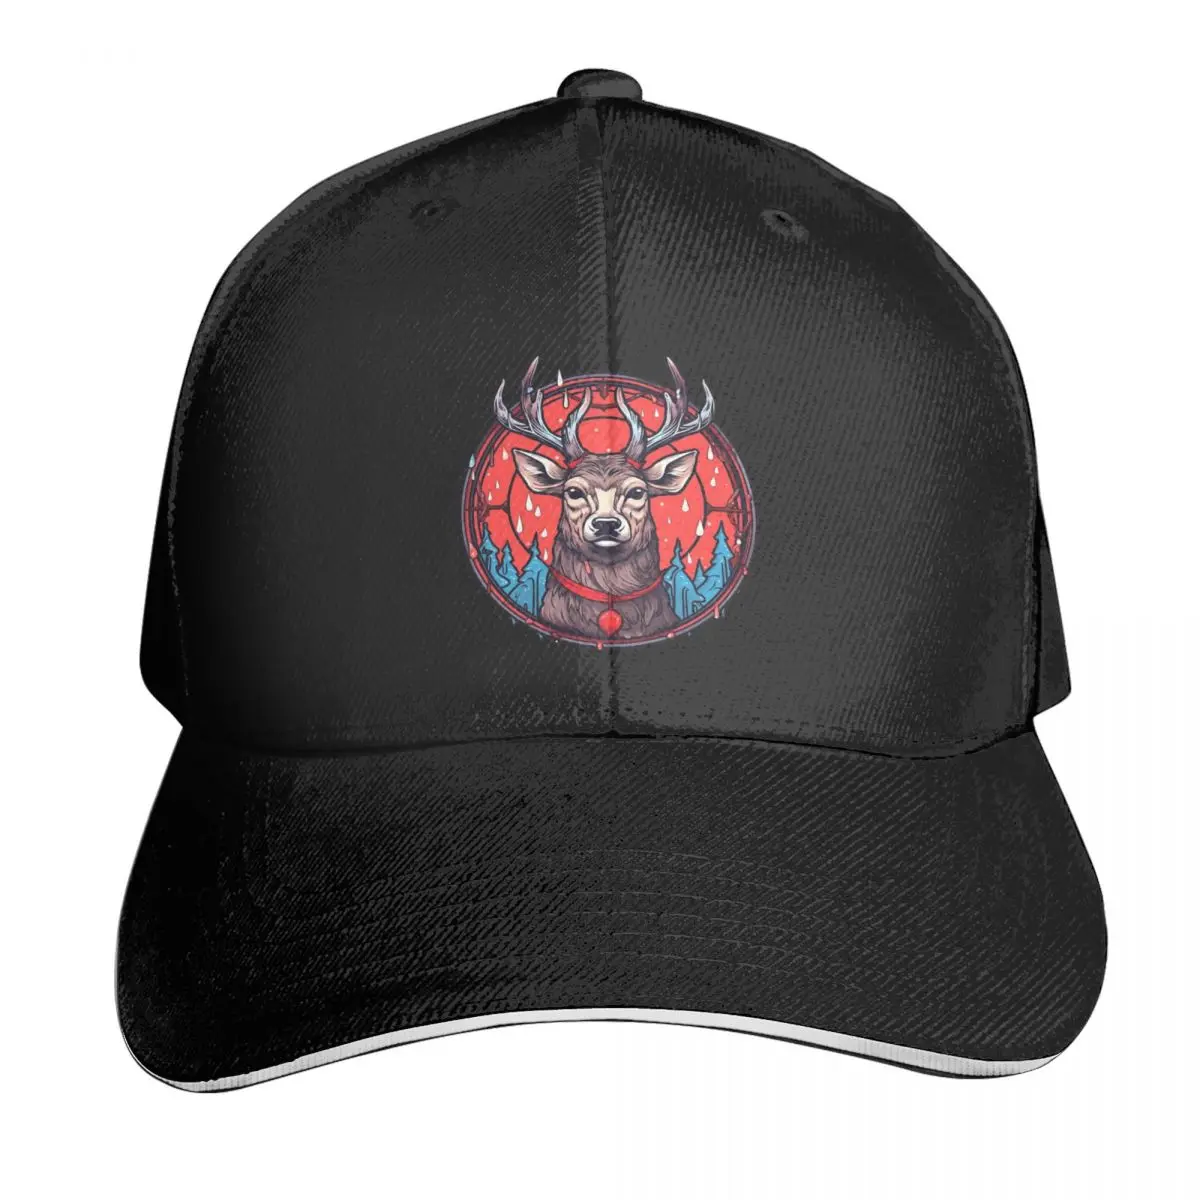 

Deer With Red Circle, Icy Trees And Snow Drops Casquette, Polyester Cap Fashionable Practical For Travel